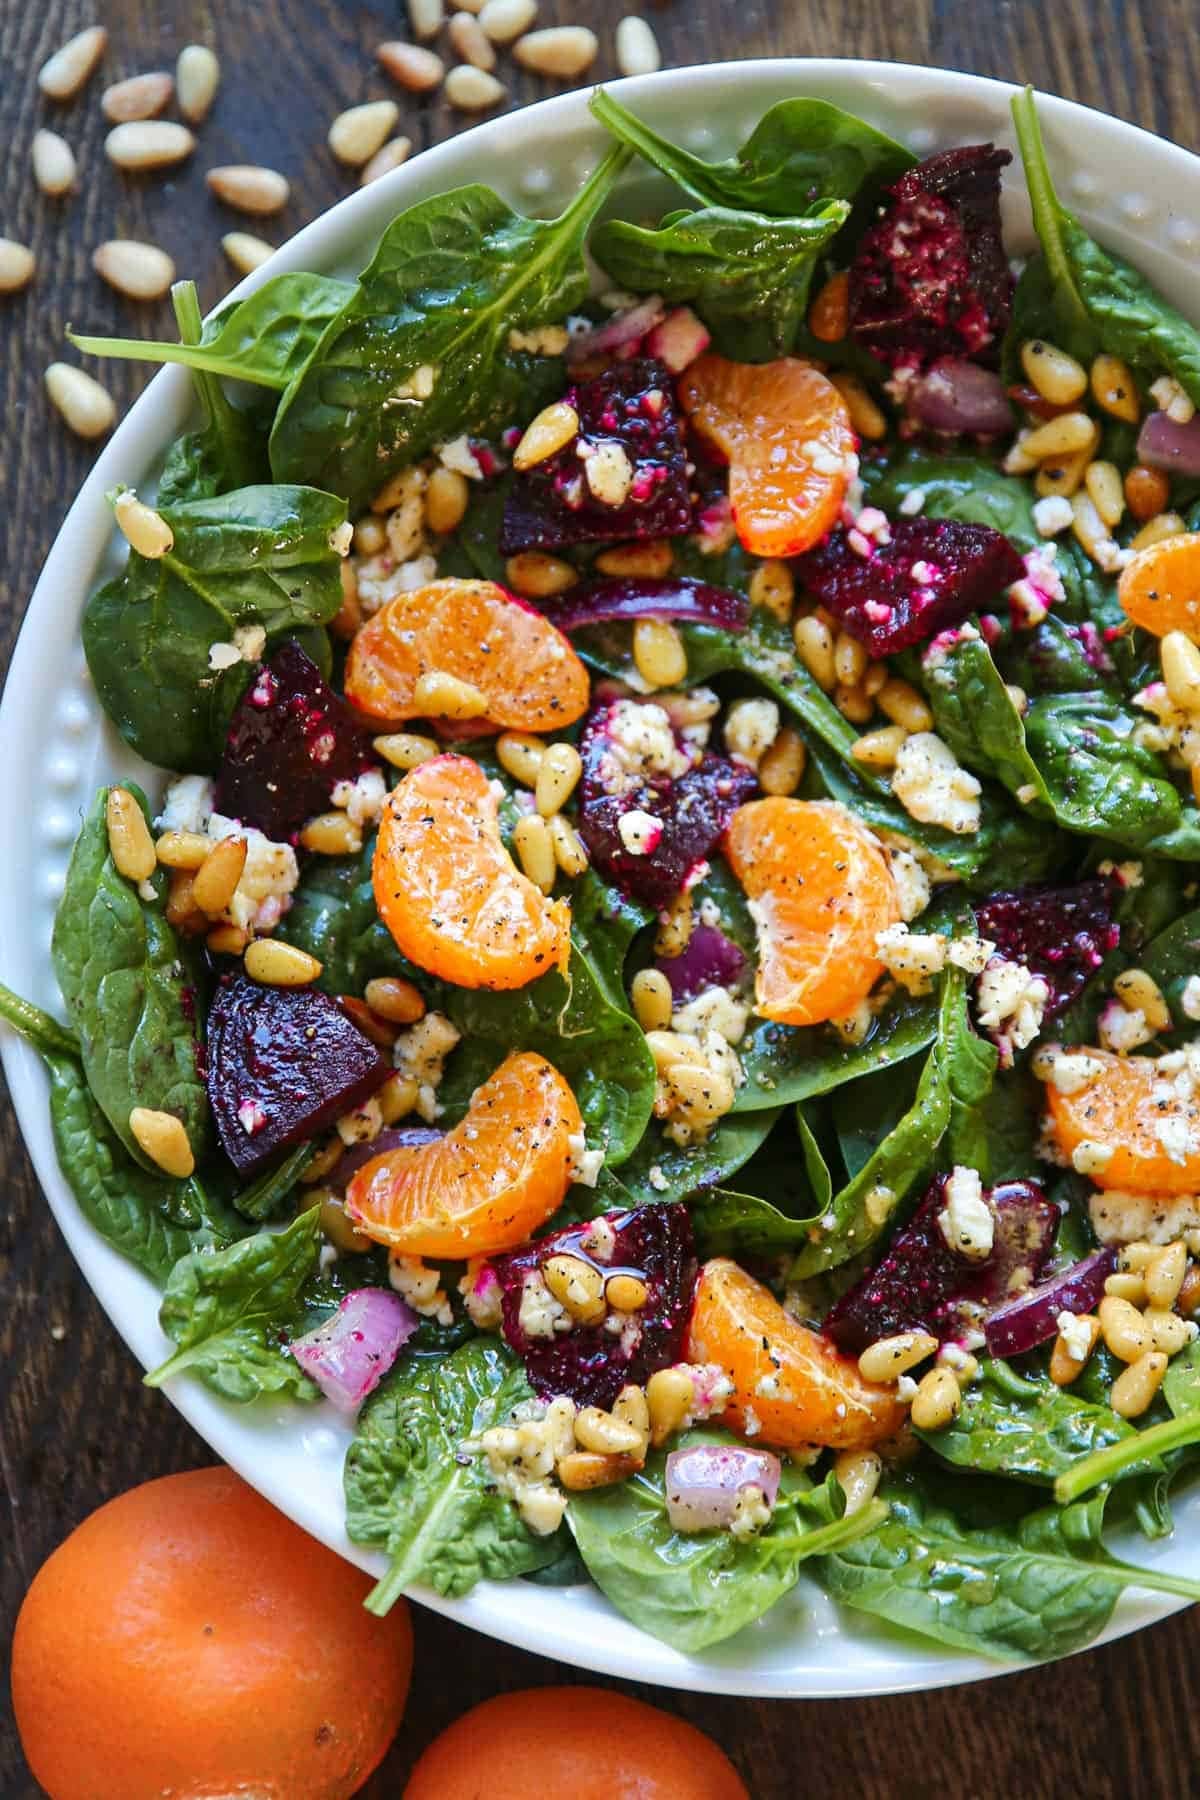 Roasted beet and orange salad with toasted pine nuts paired with meaty beets and tart oranges. 